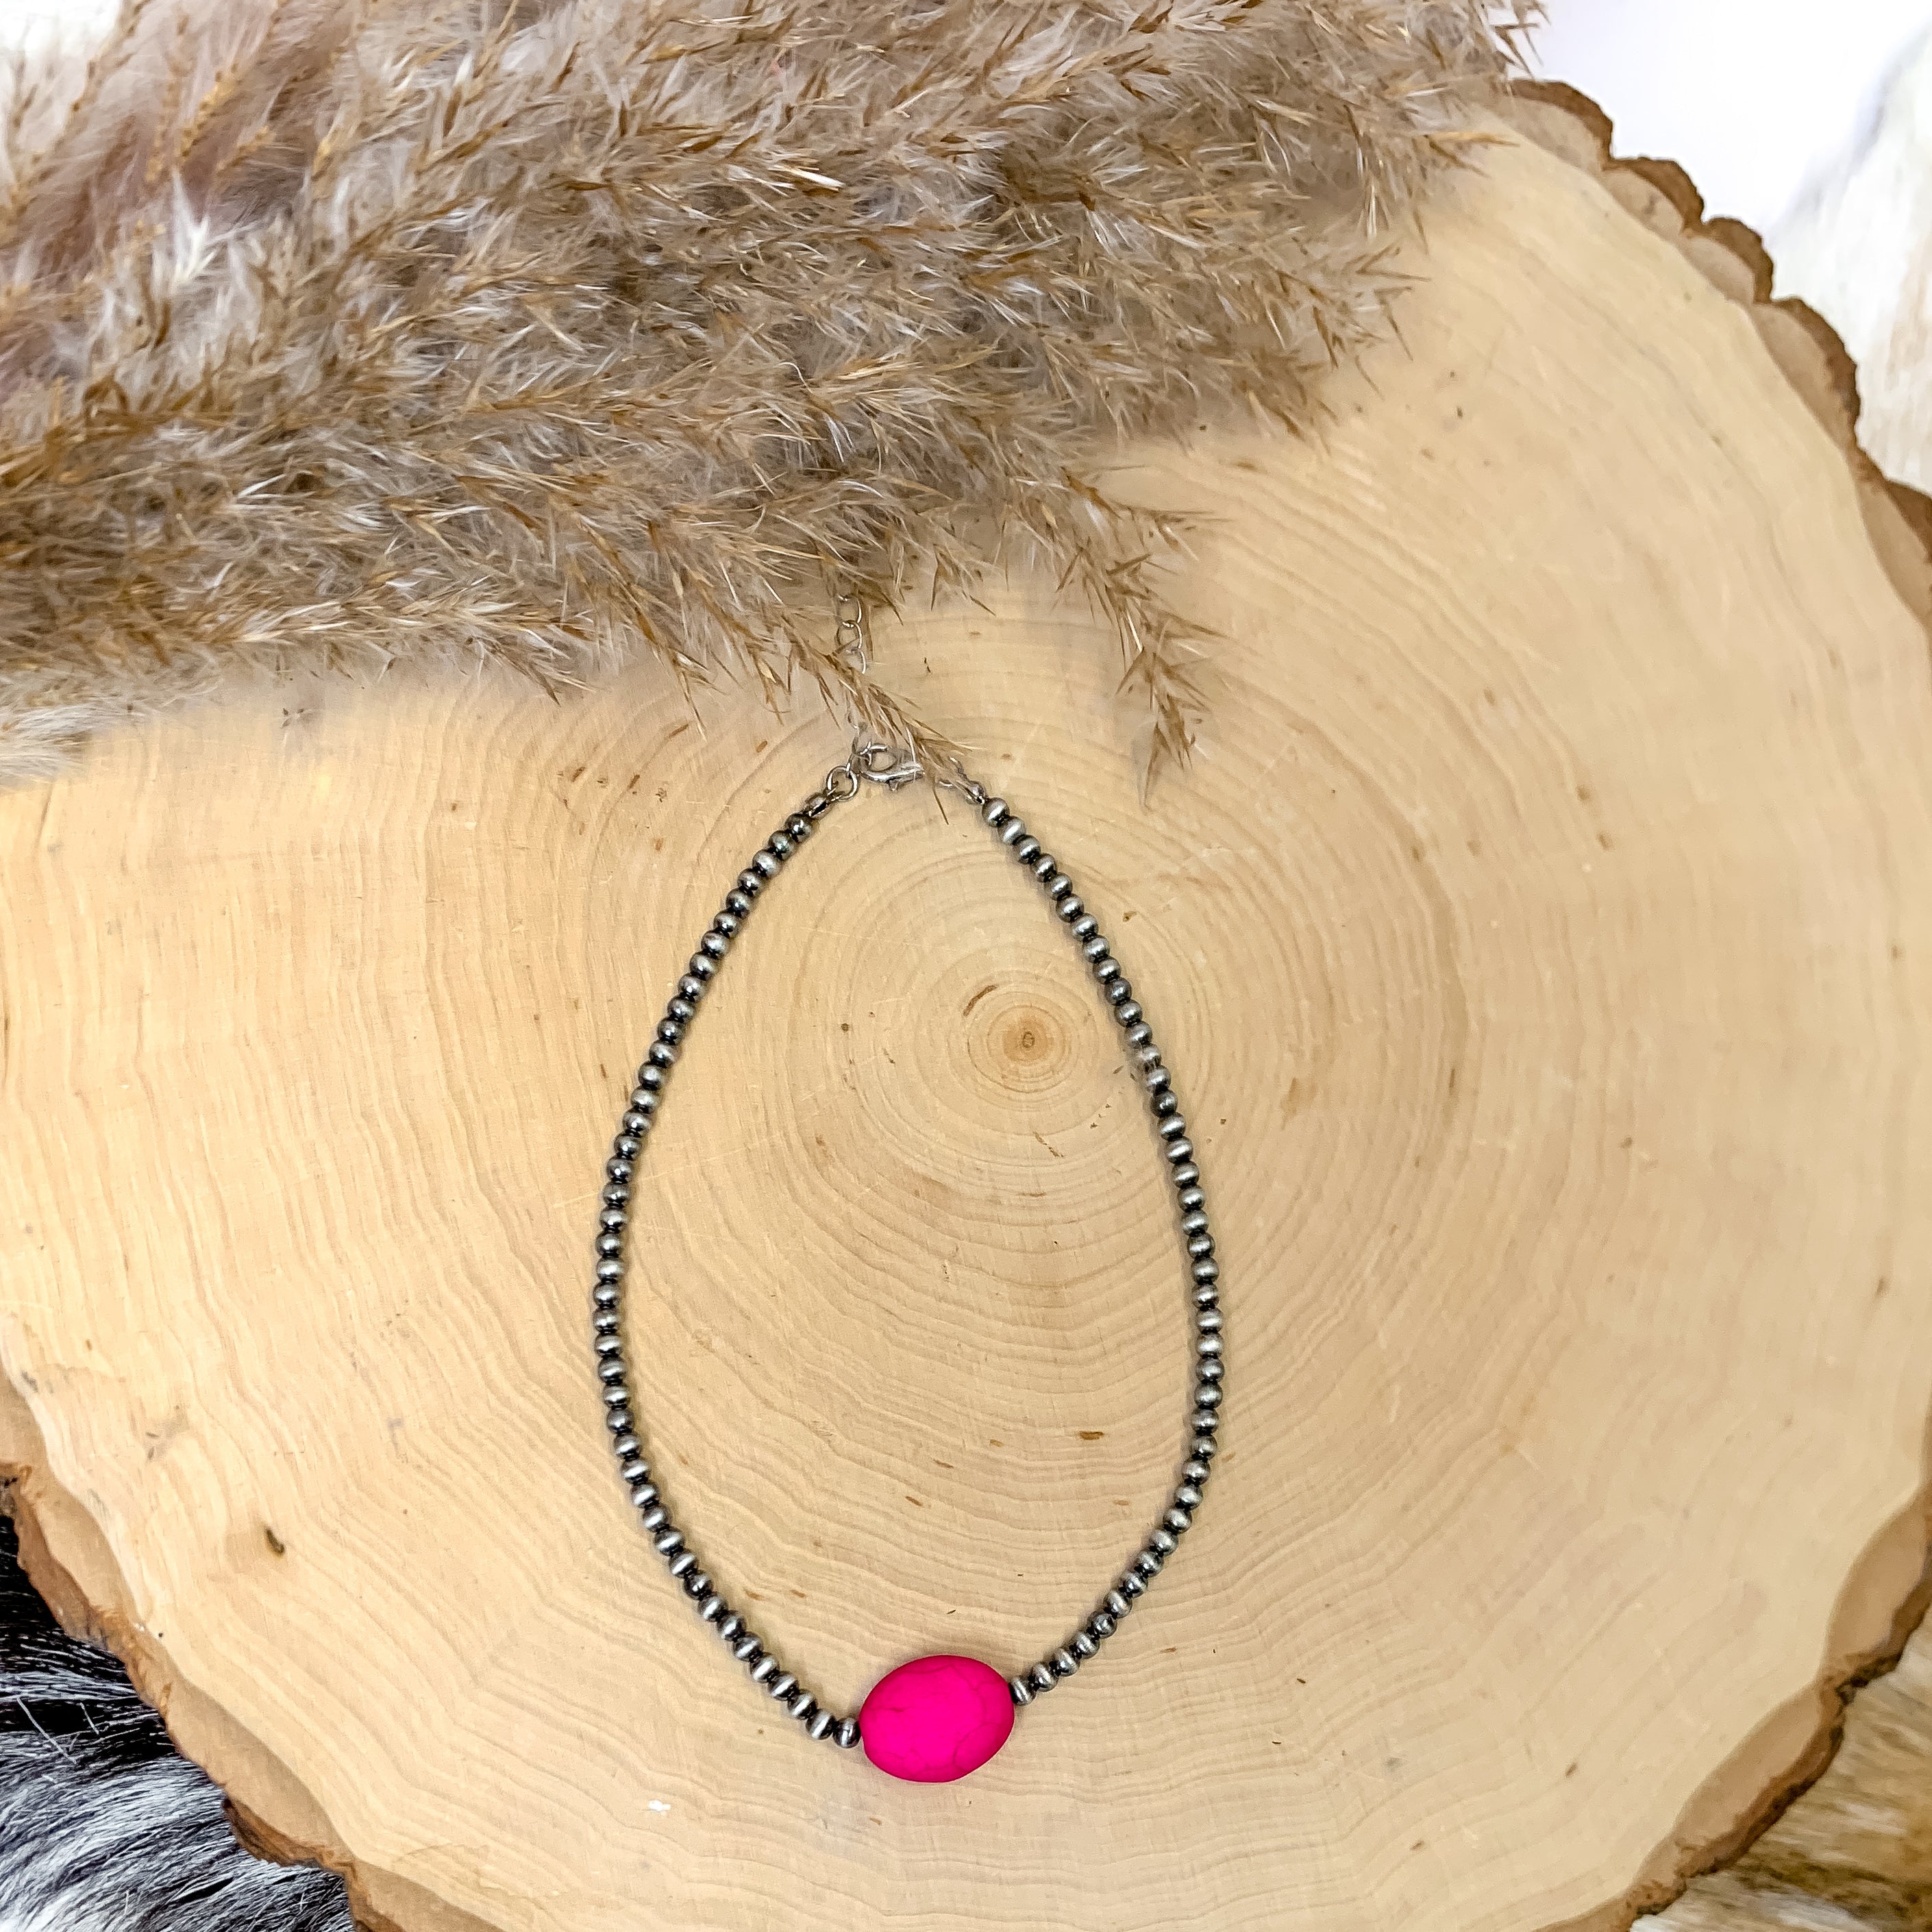 Small Faux Navajo Pearls Choker Necklace in Silver Tone with Fuchsia Pink Oval Stone